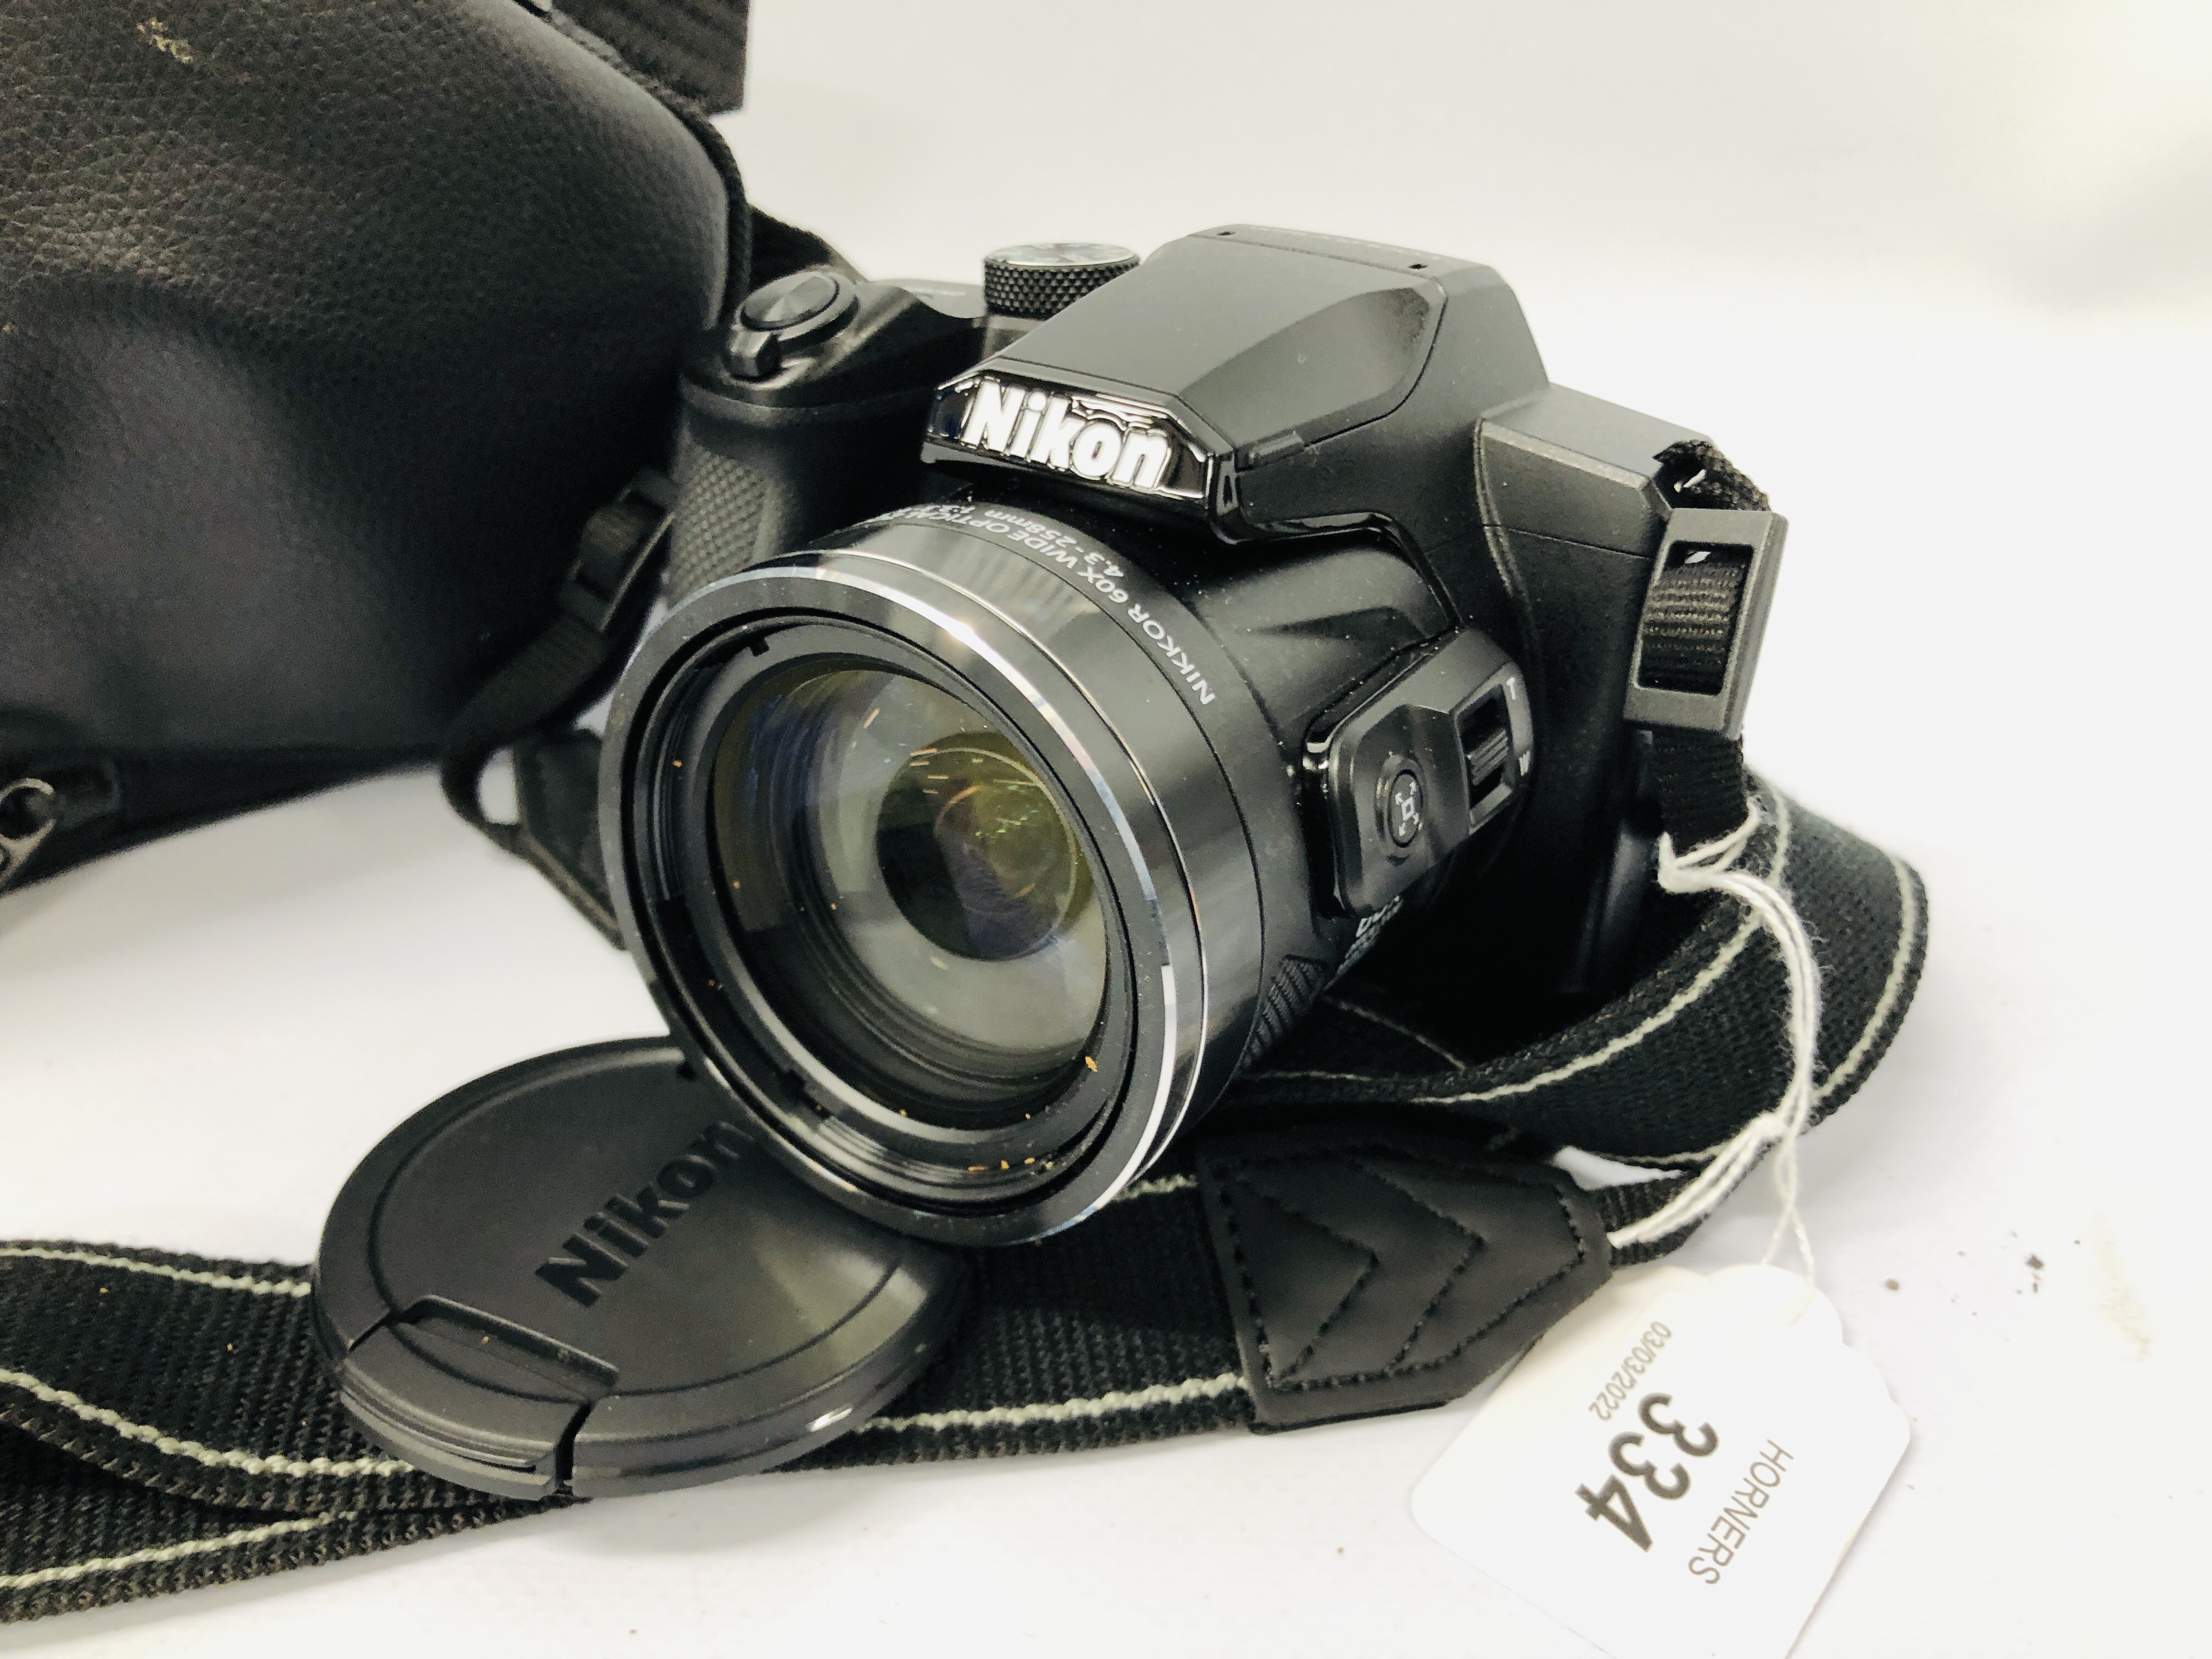 NIKON COOLPIX B600 DIGITAL CAMERA WITH CAMERA BAG AND CHARGER S/N 74001233 - SOLD AS SEEN. - Image 2 of 5